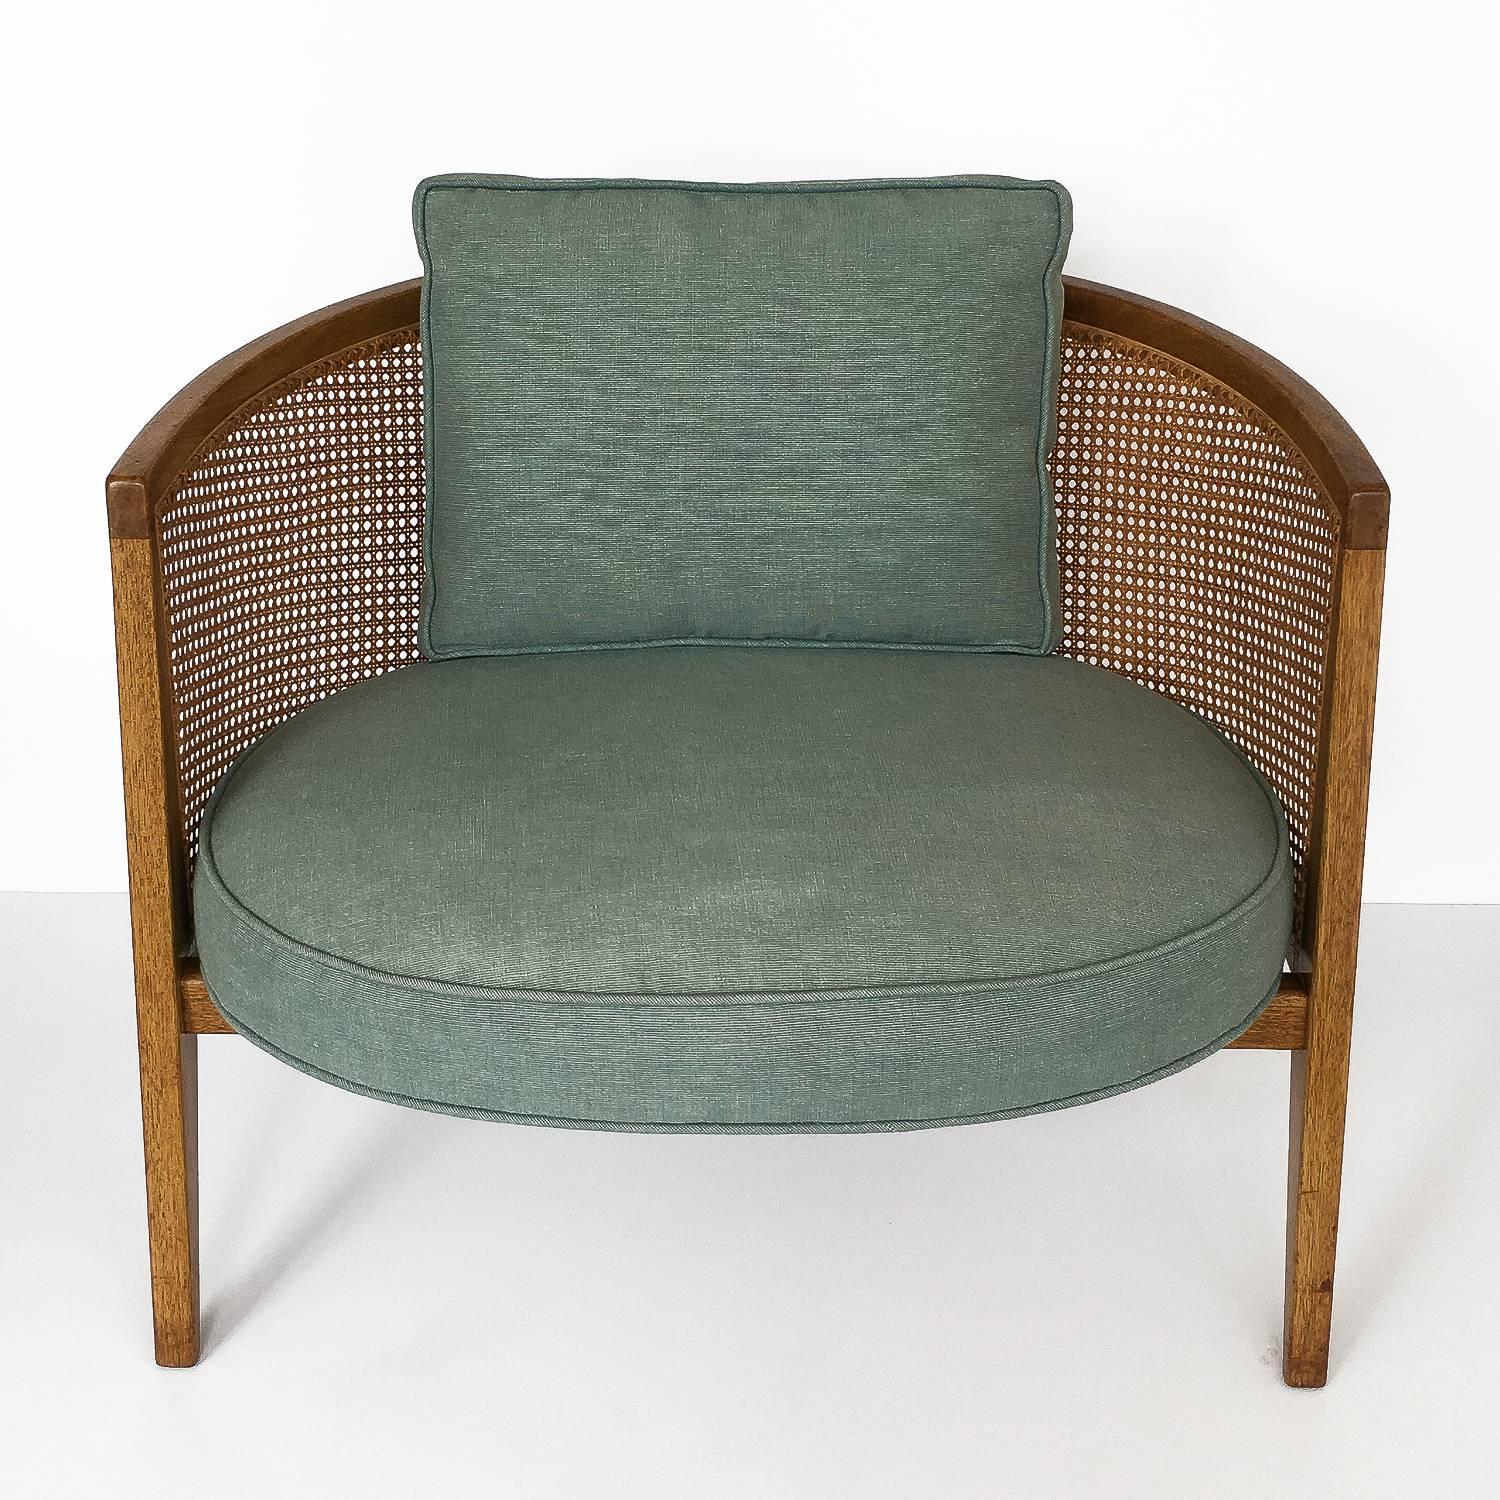 Harvey Probber hoop back lounge chair, model 1066, circa 1950s. Angular mahogany frame and woven curved cane back. Original sea-foam colored fabric upholstery with down filled loose back cushion. Original finish with no restoration. General wear and